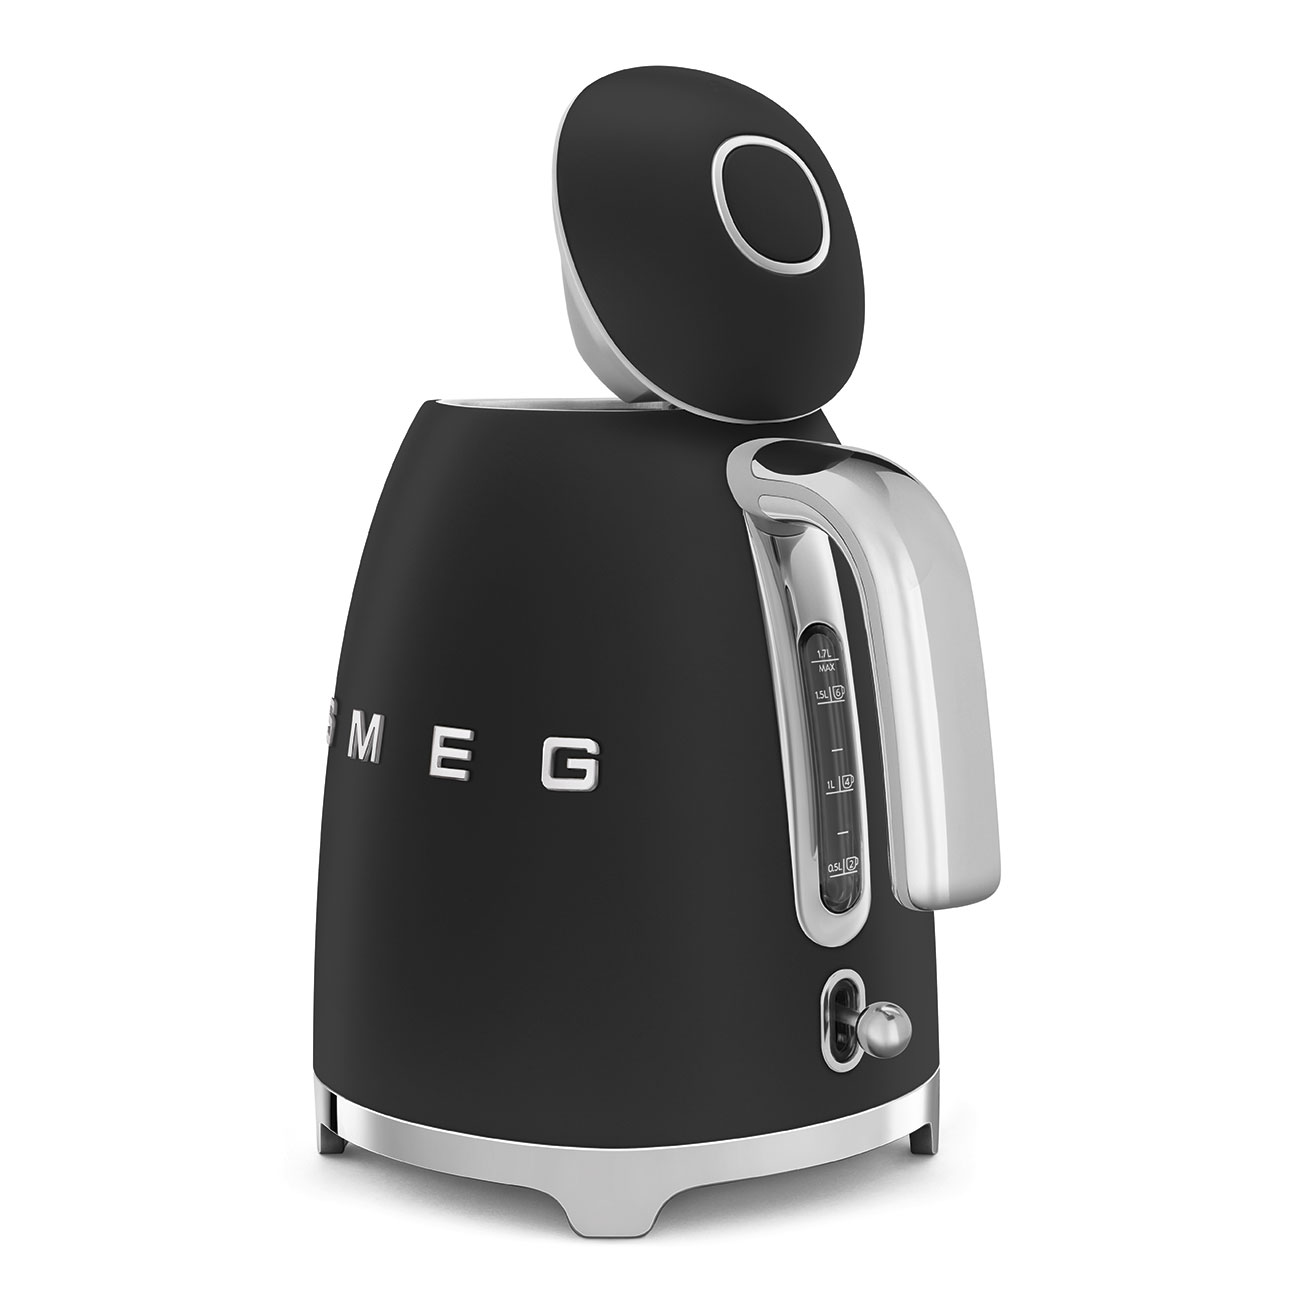 Smeg KLF03SSUS 50's Retro Style Aesthetic Electric Kettle with